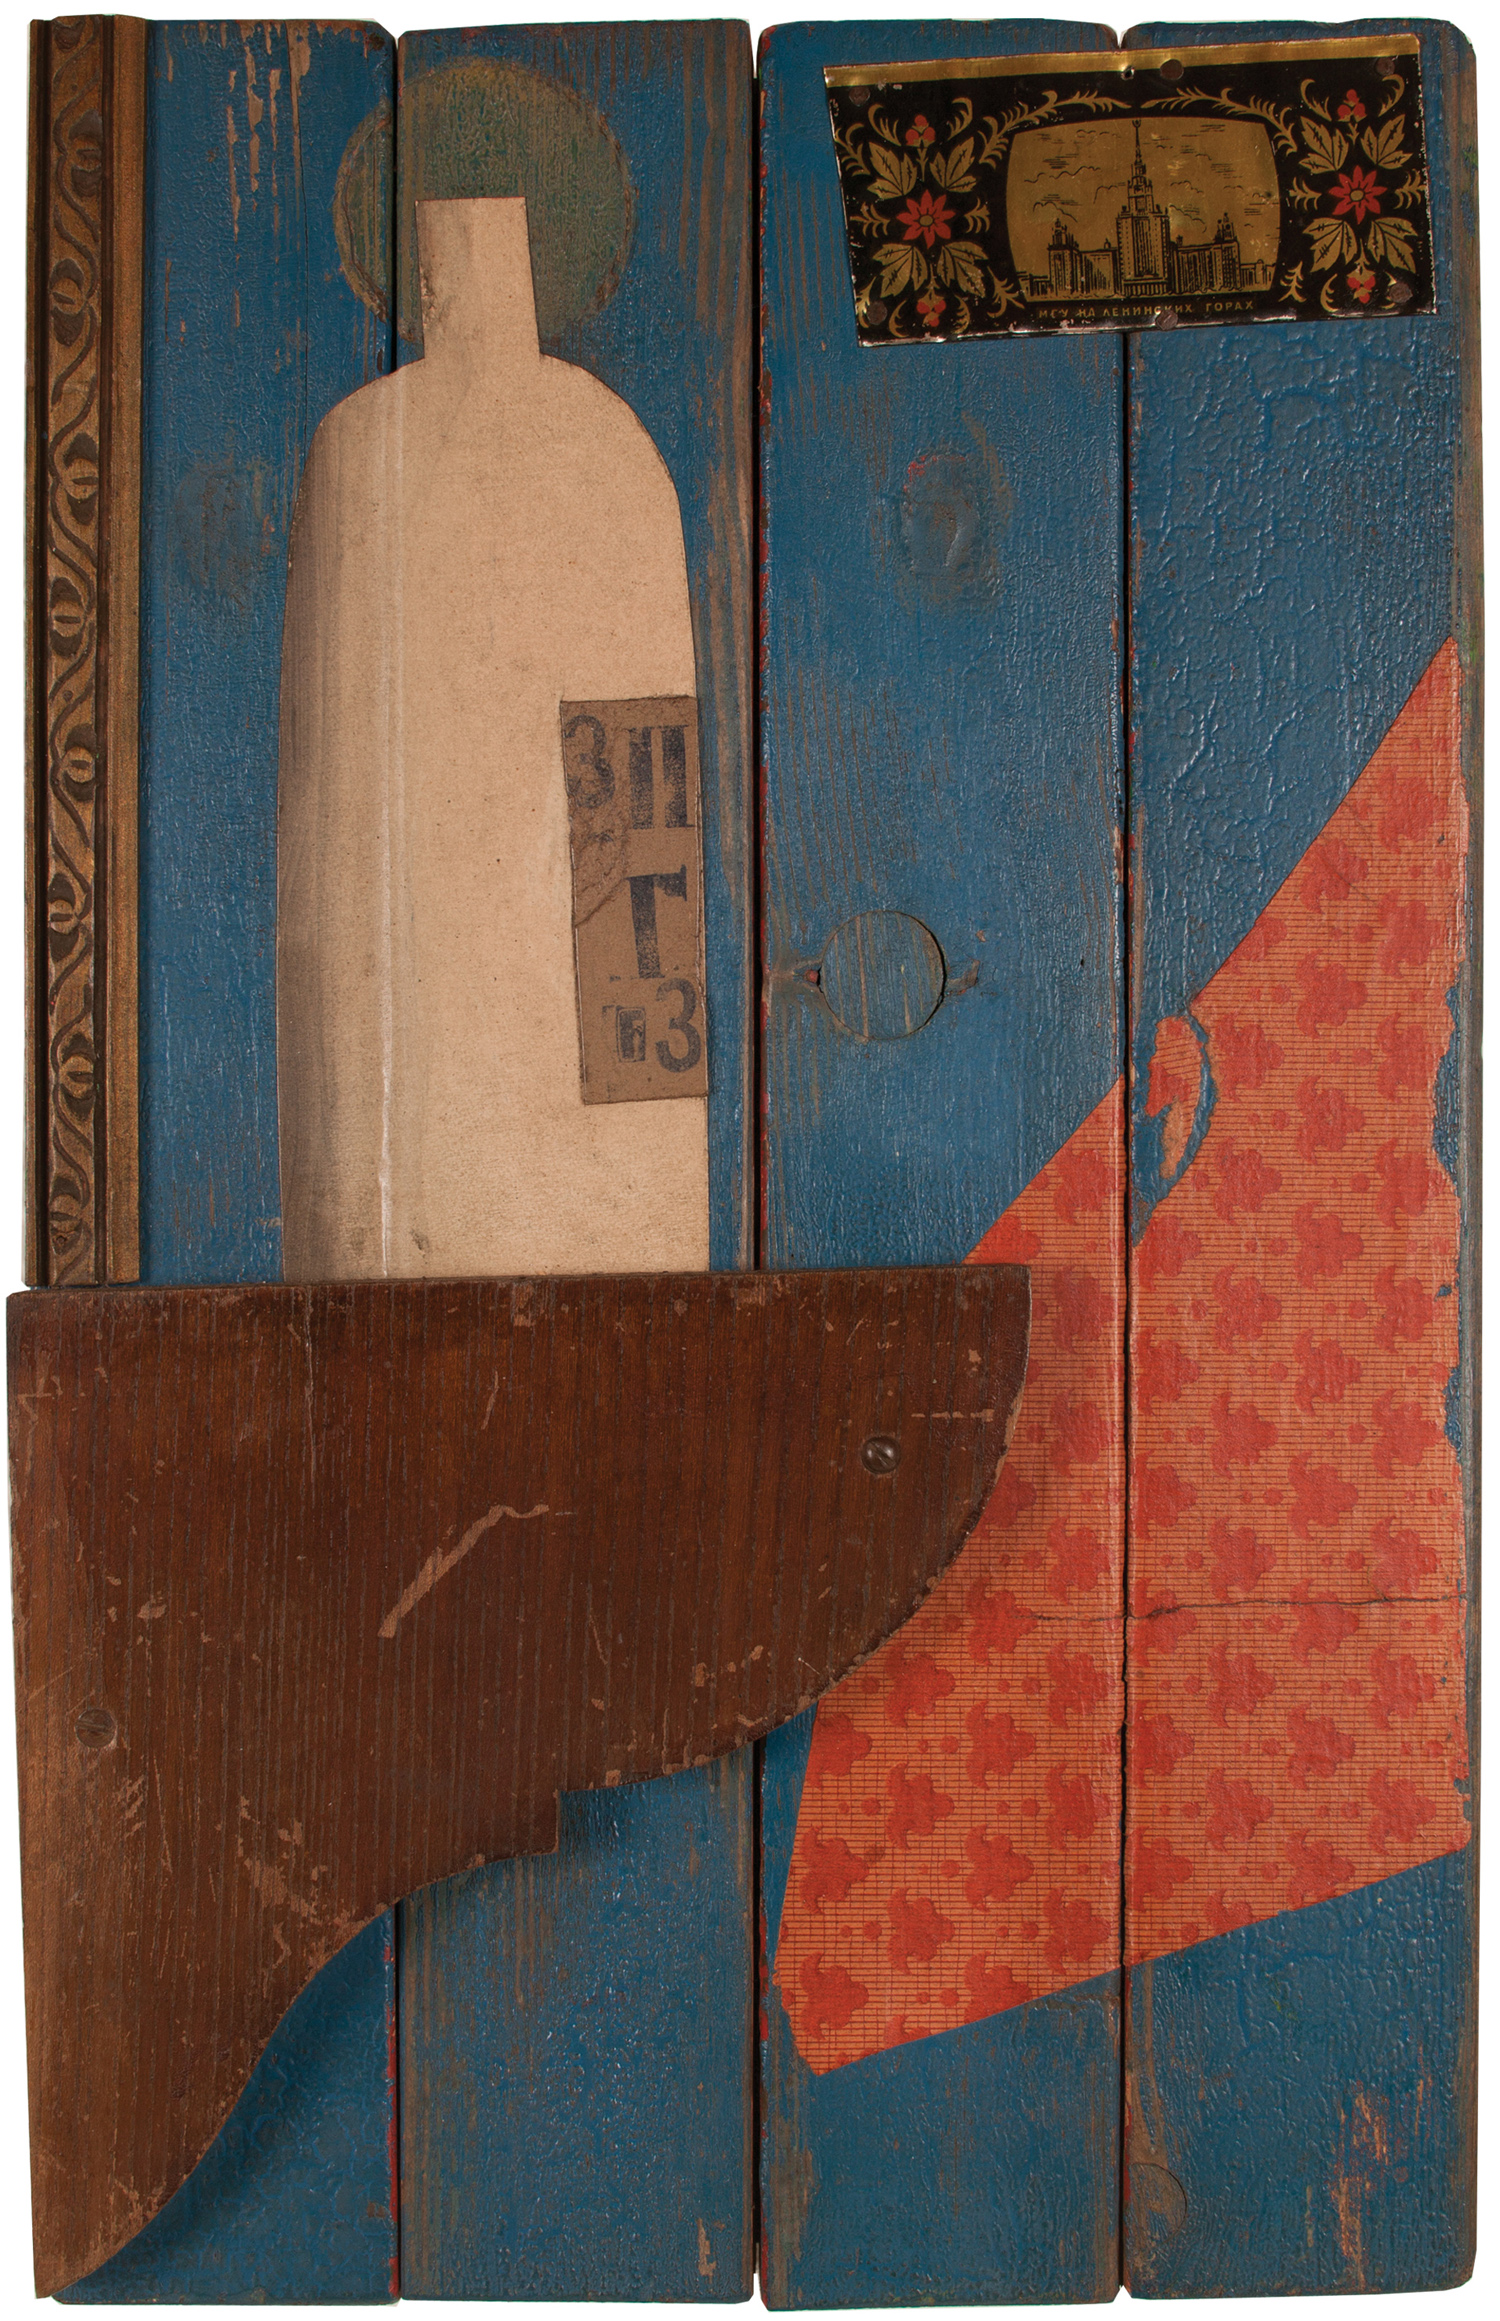  Unattributed. Signed “B” in Russian, translates to “V”.   In the style of Vladimir Tatlin.Inscription on front, in Russian, translates to “TEA ROOM”.   Mixed media wooden construction. 52 x 34 cm. 